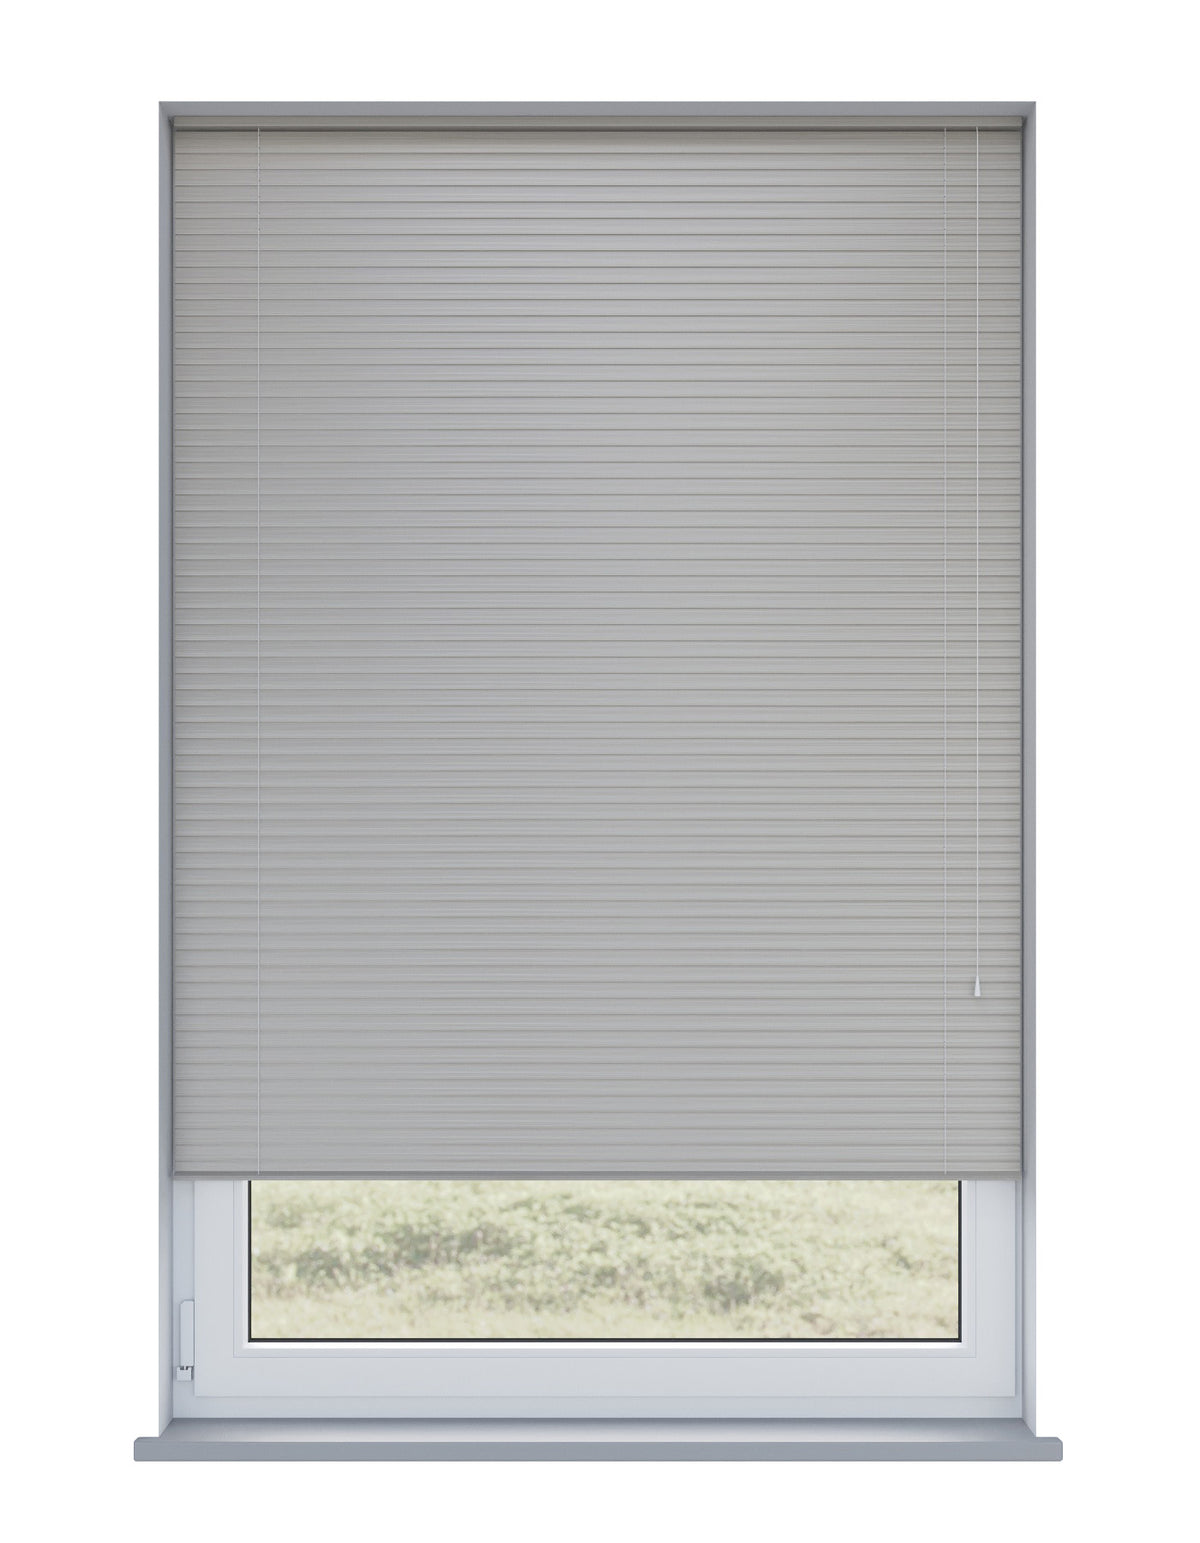 Expressions Graphite Grey Wooden Blind